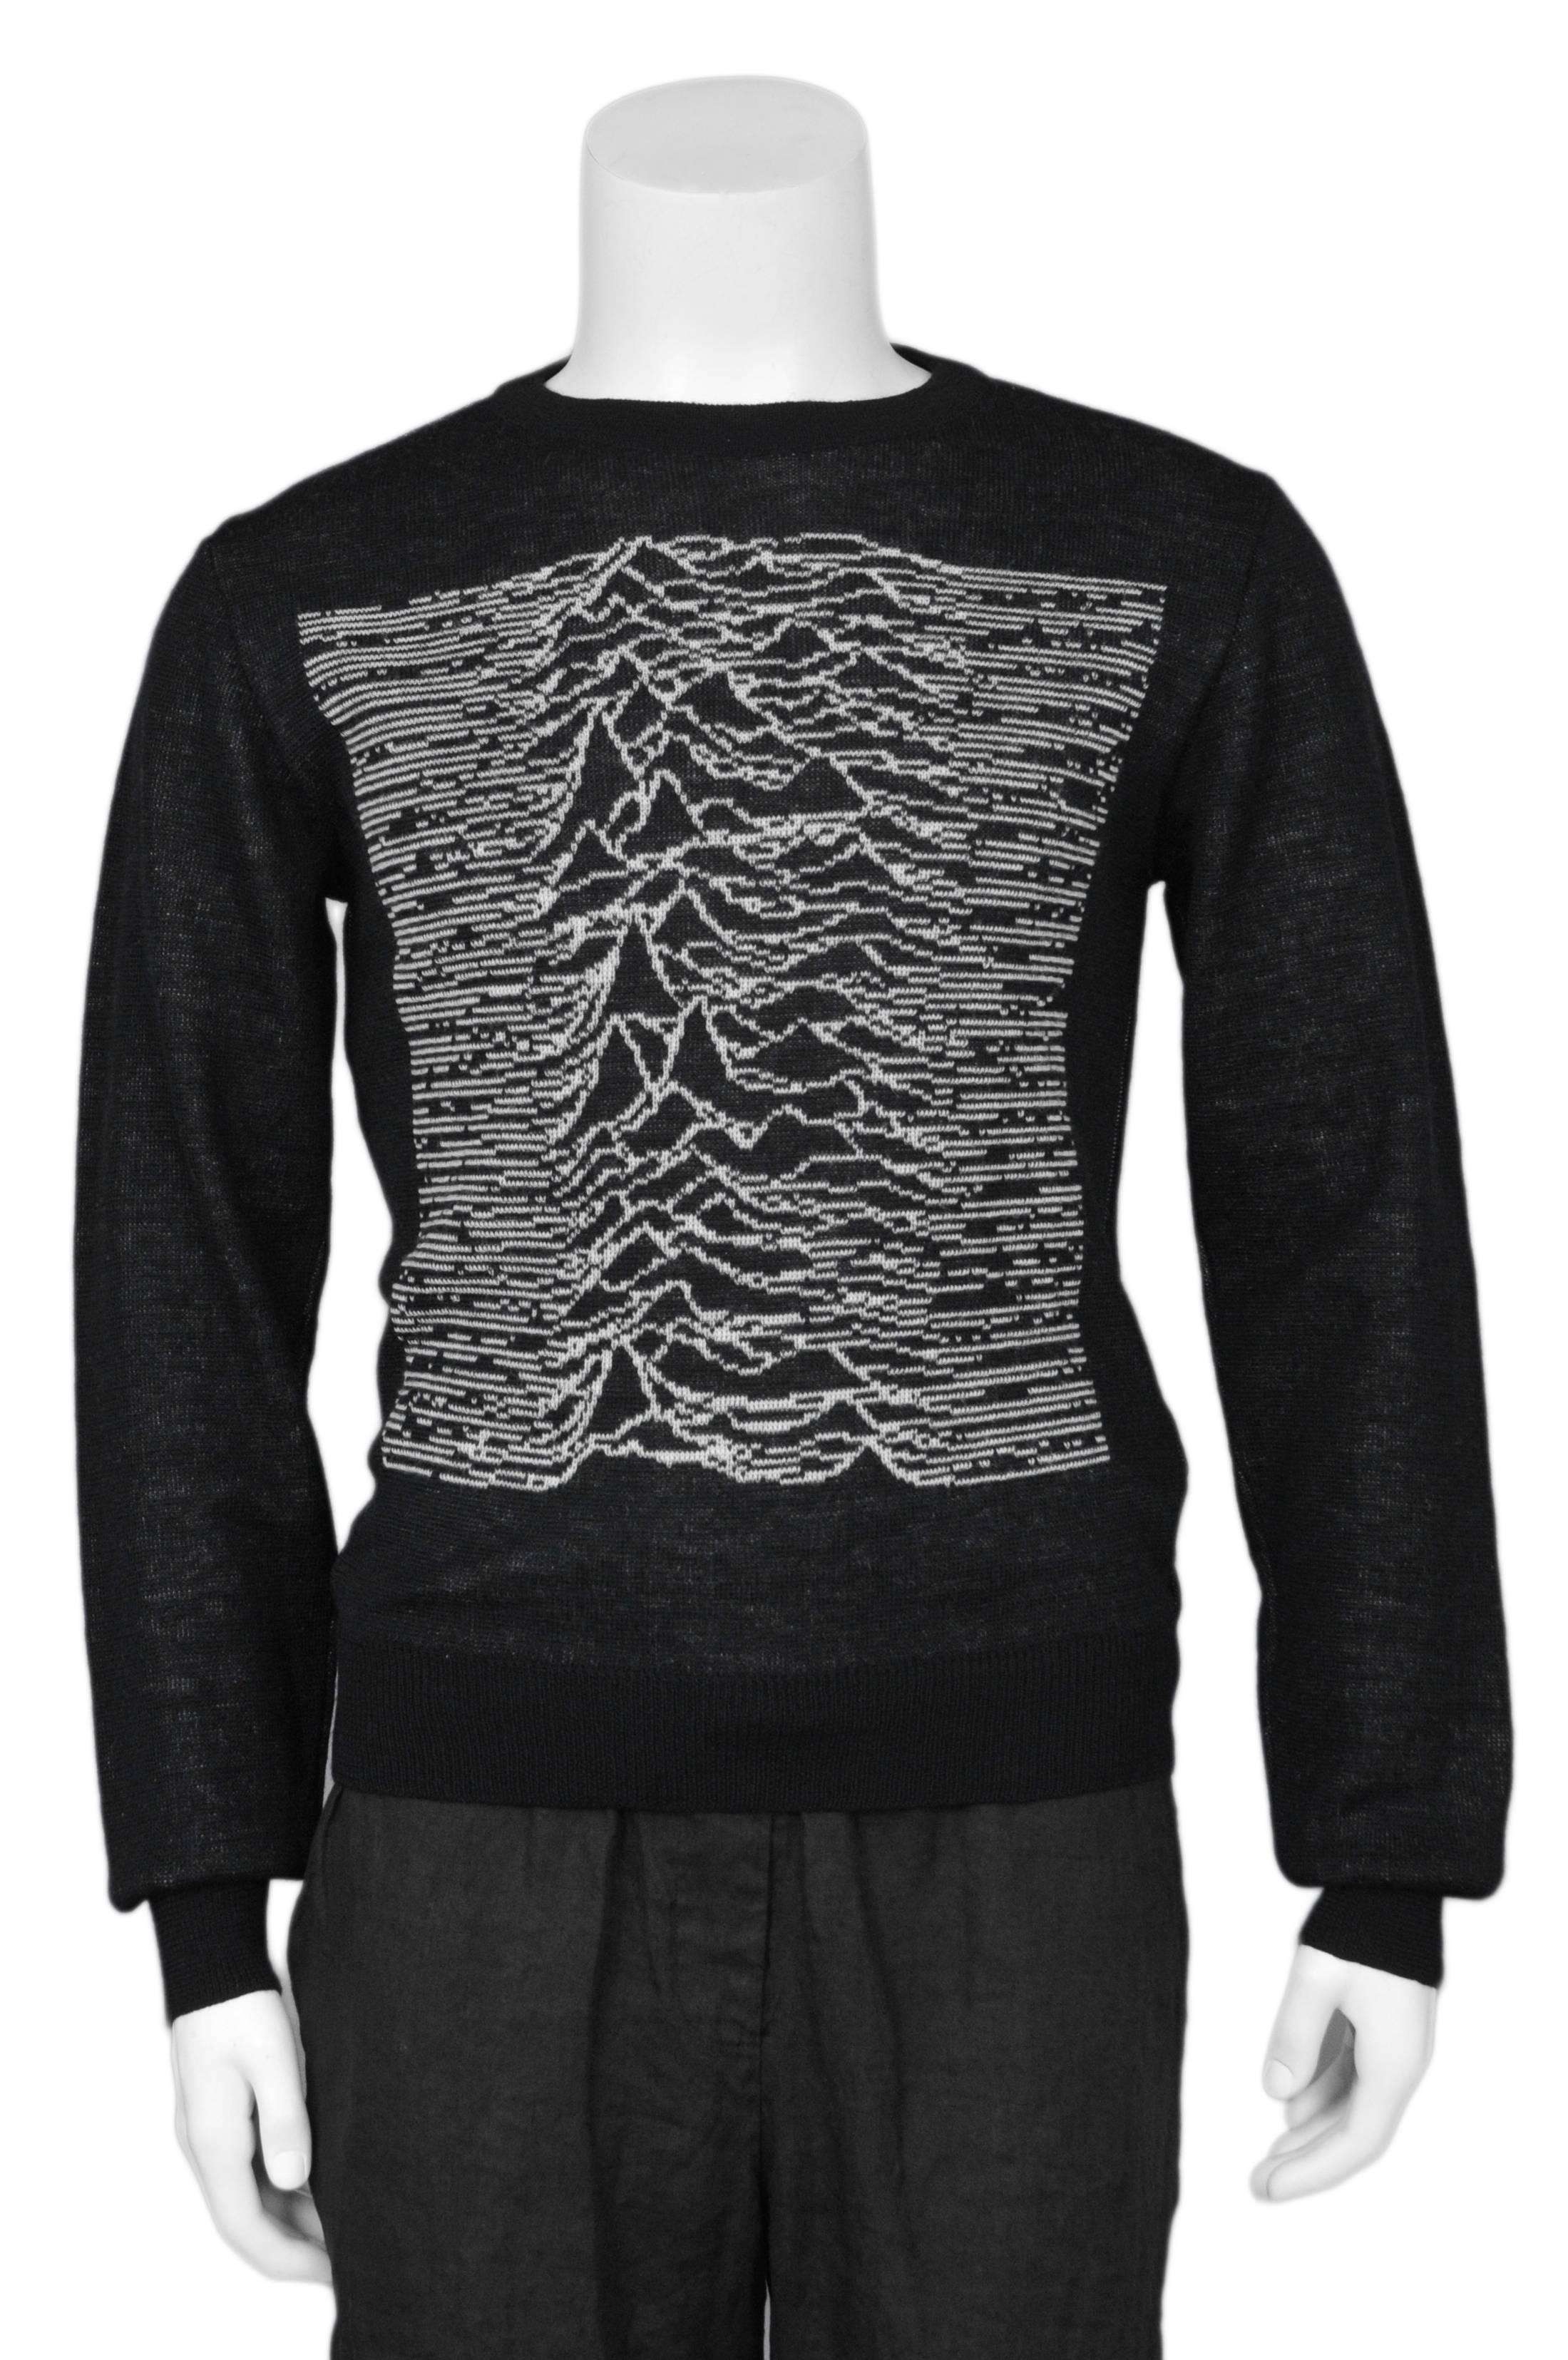 Raf Simons and Peter Saville collaboration black knit pullover sweater with white graphic. The sweater features a graphic designed by Saville for 1980's British band Joy Division's iconic album, Unknown Pleasures. From the 2003-04 collection.